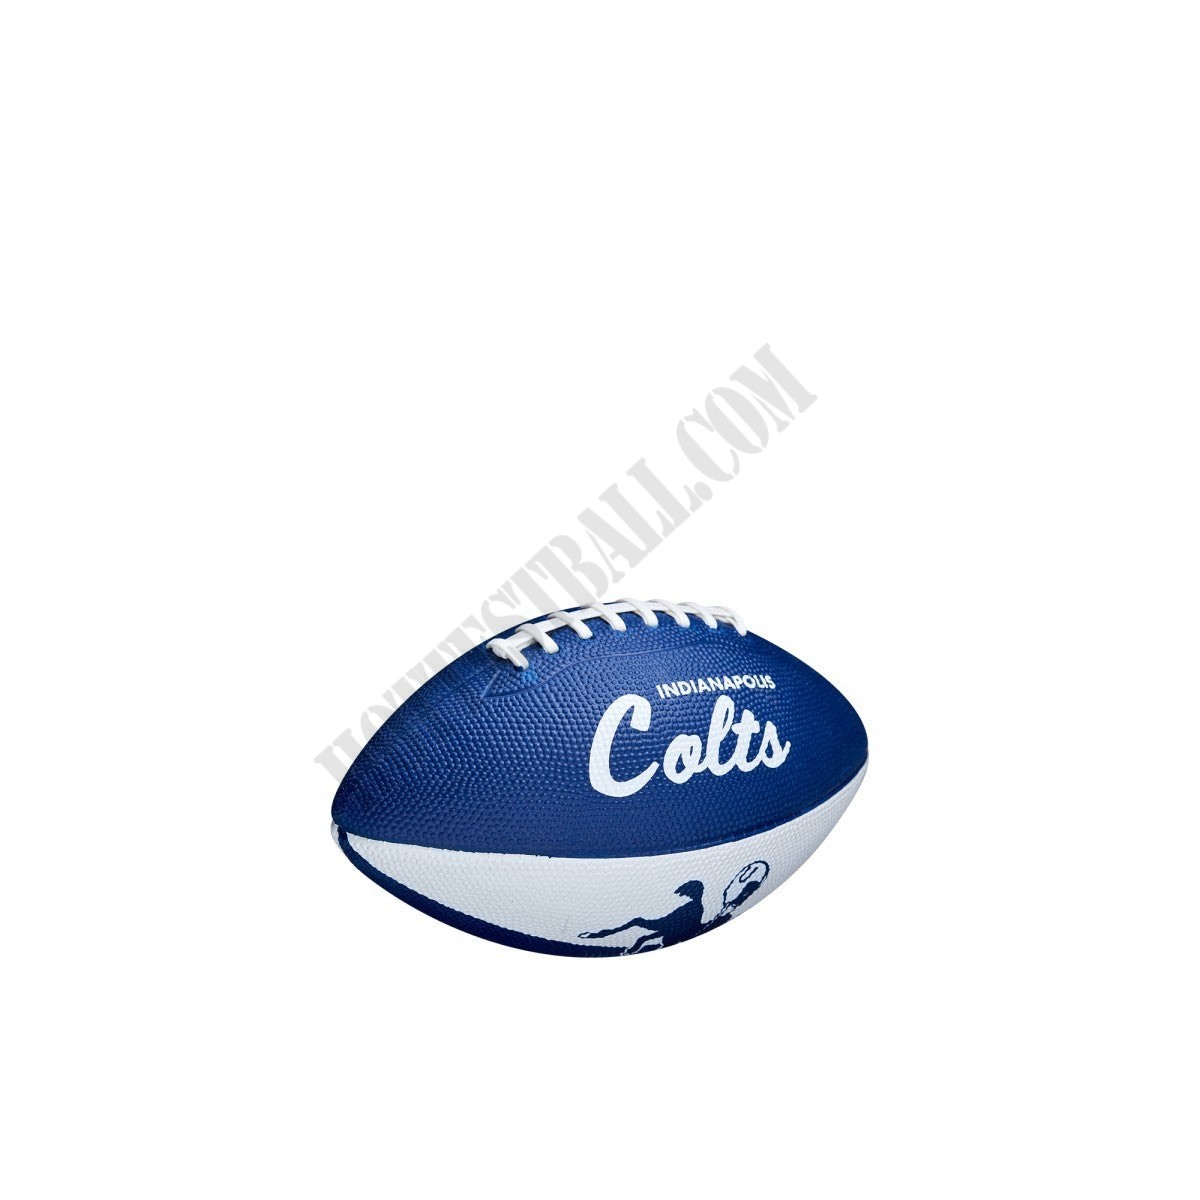 NFL Retro Mini Football - Indianapolis Colts ● Wilson Promotions - -3